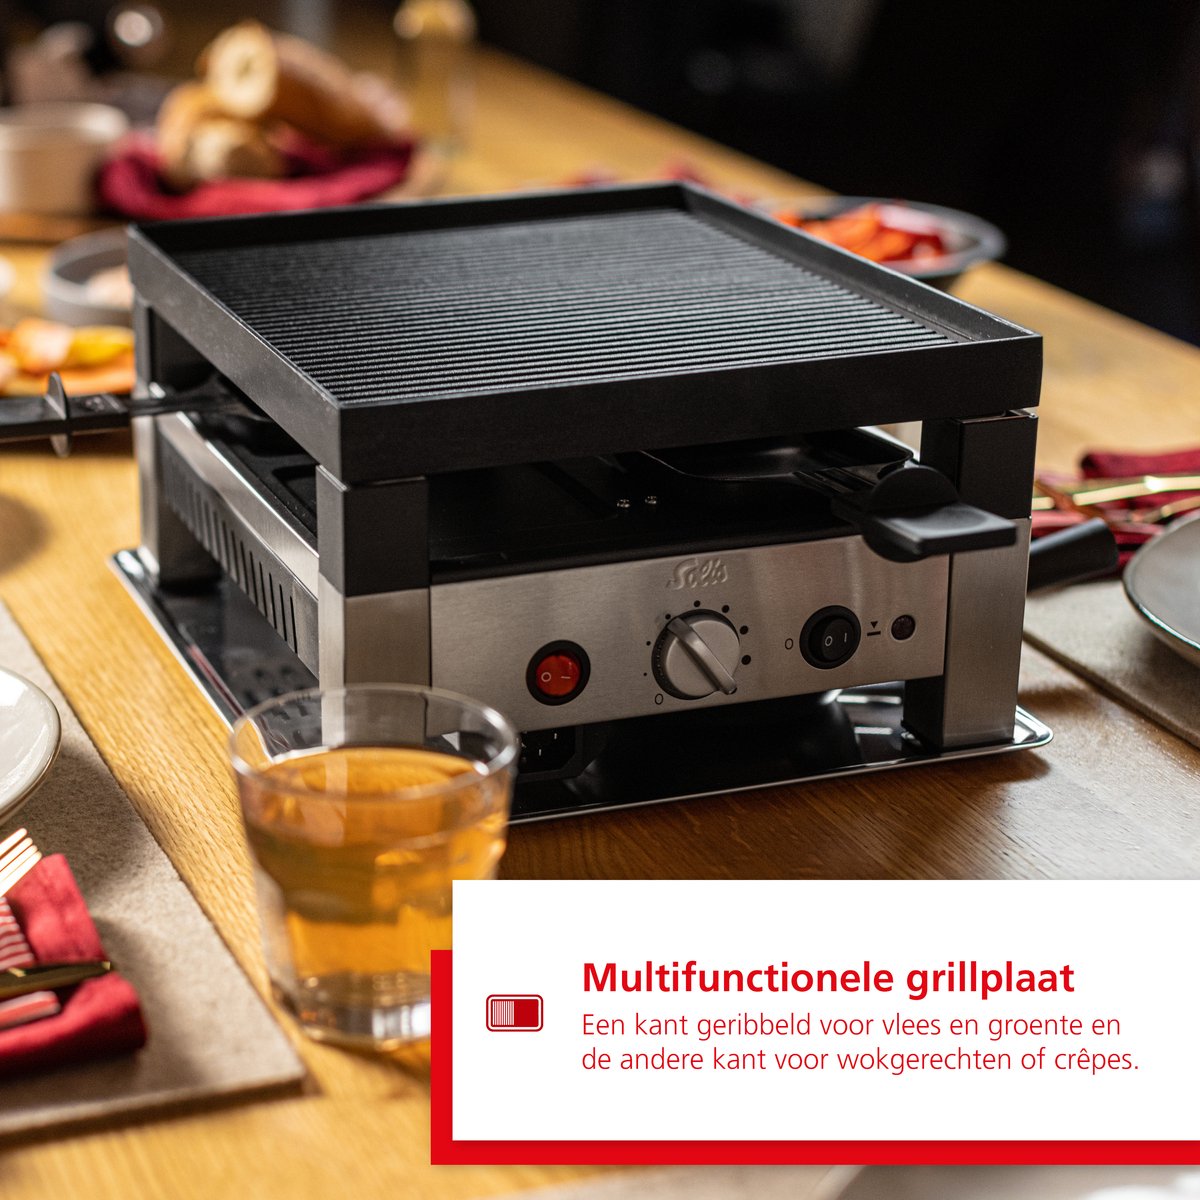 4 1 Grill - | 7910 for Table - 5 Electrique Grill Appareil a in bol -... Raclette Solis